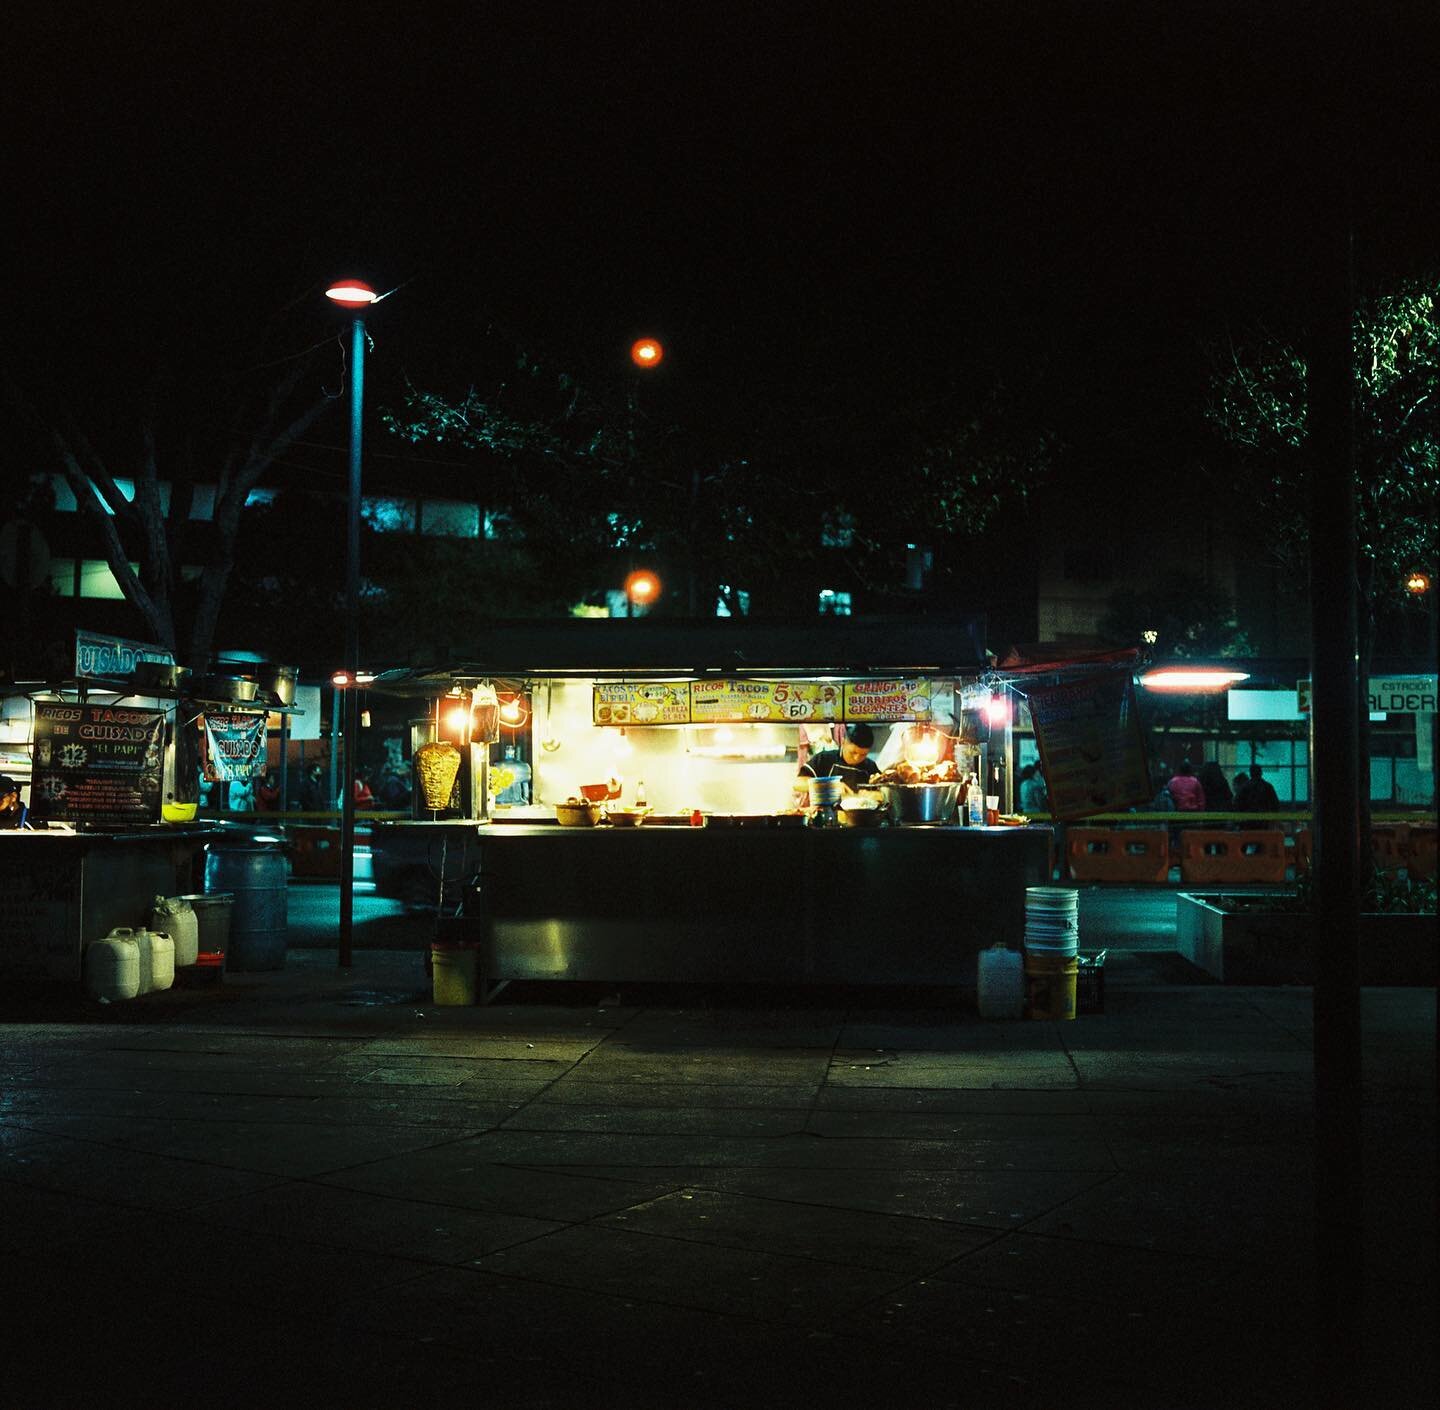 The tacos that guide you home 🌮 
&bull;
#mamiya6 #cinestill800t